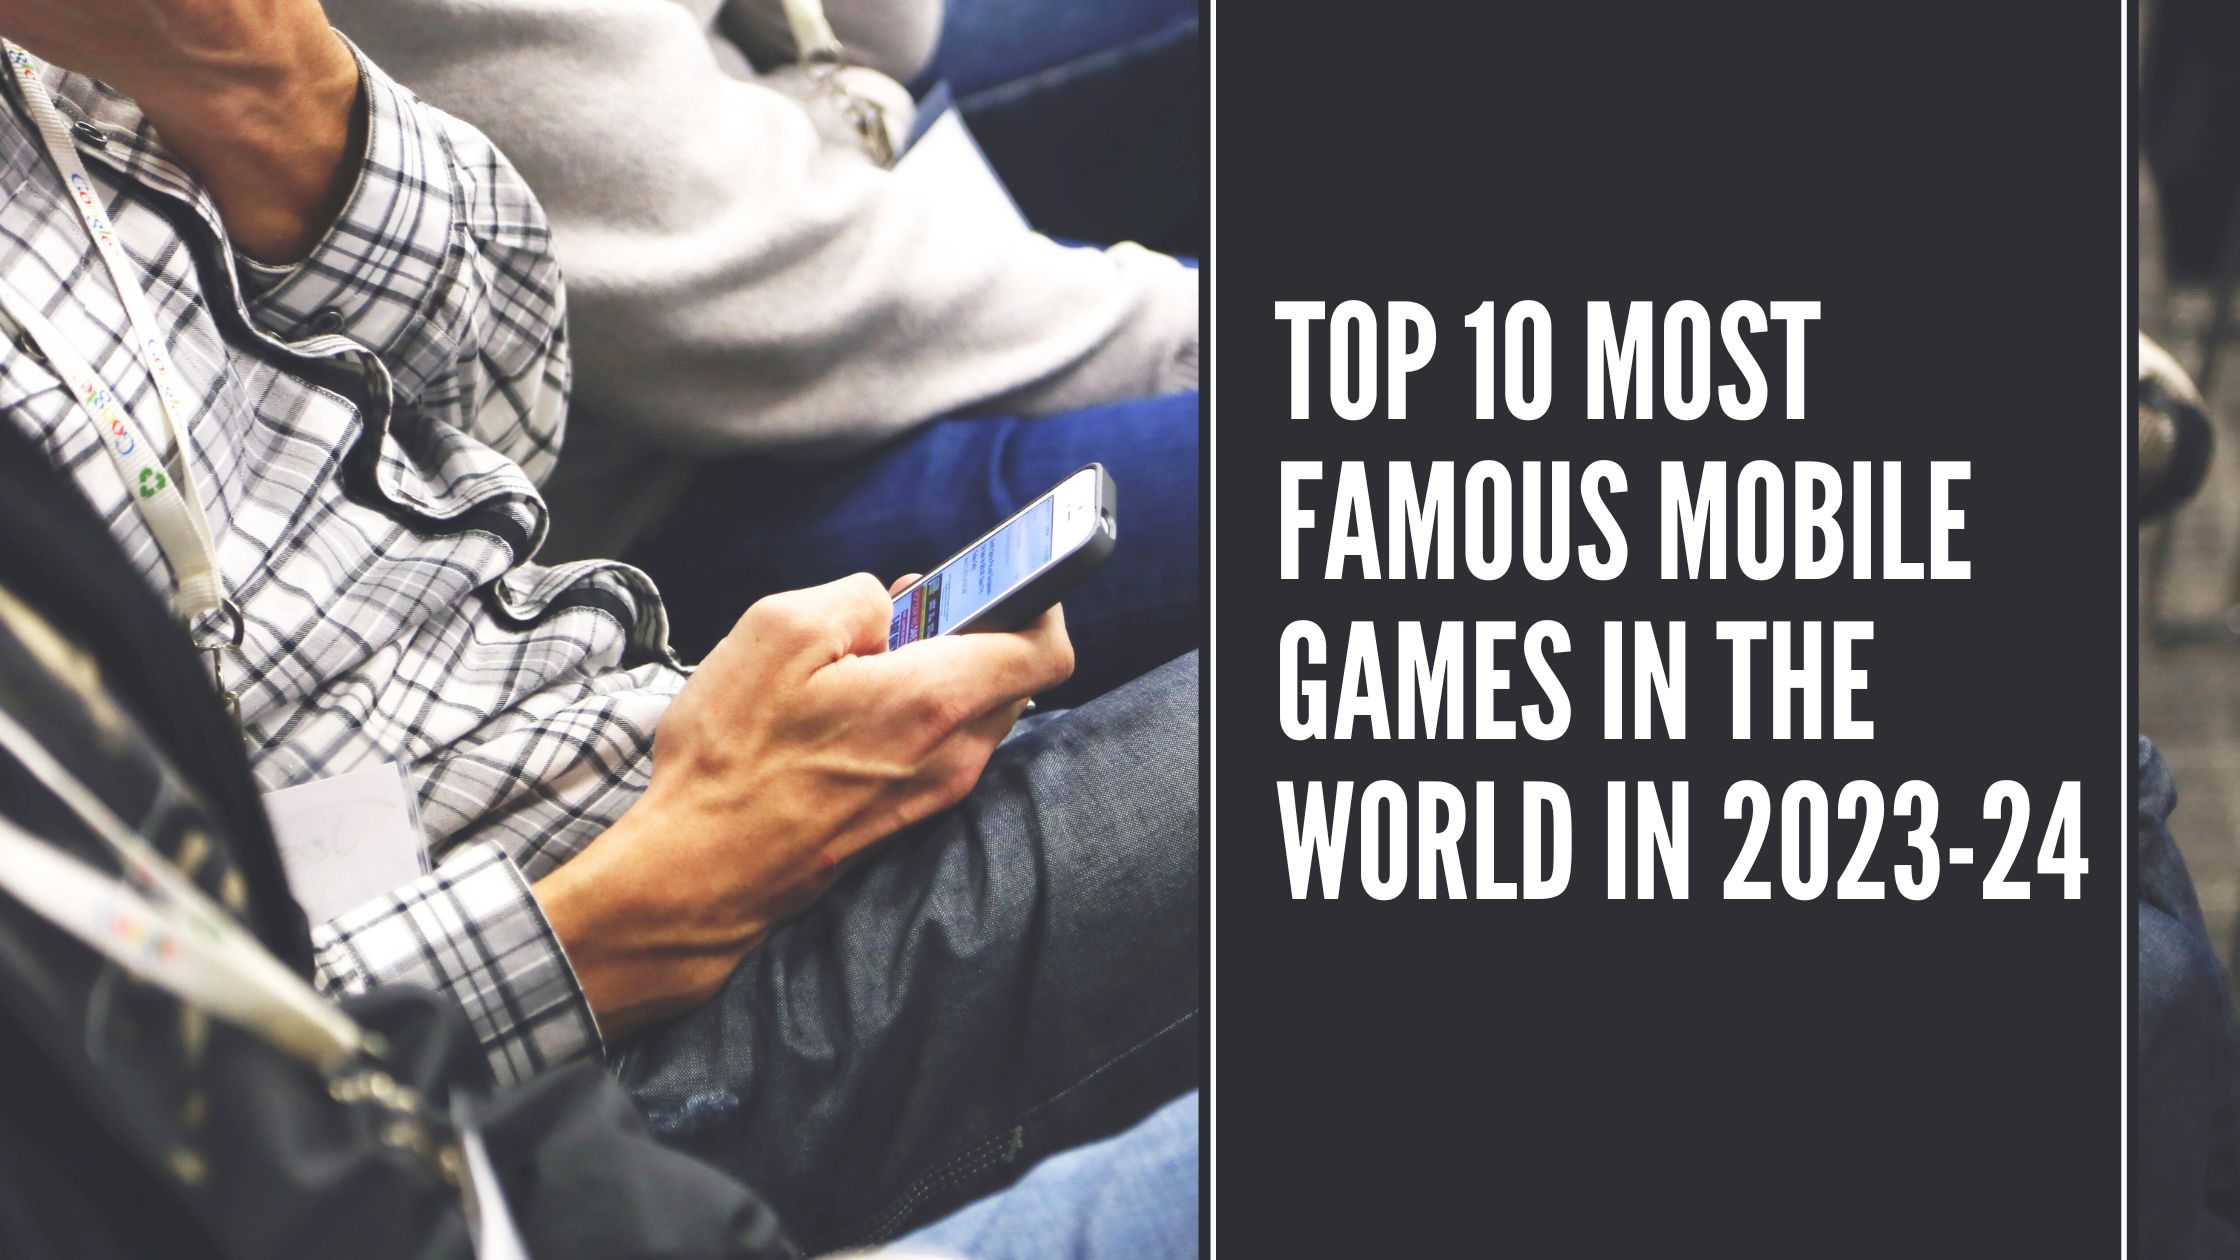 Top 10 Most Famous Mobile Games in the World in 2023-24